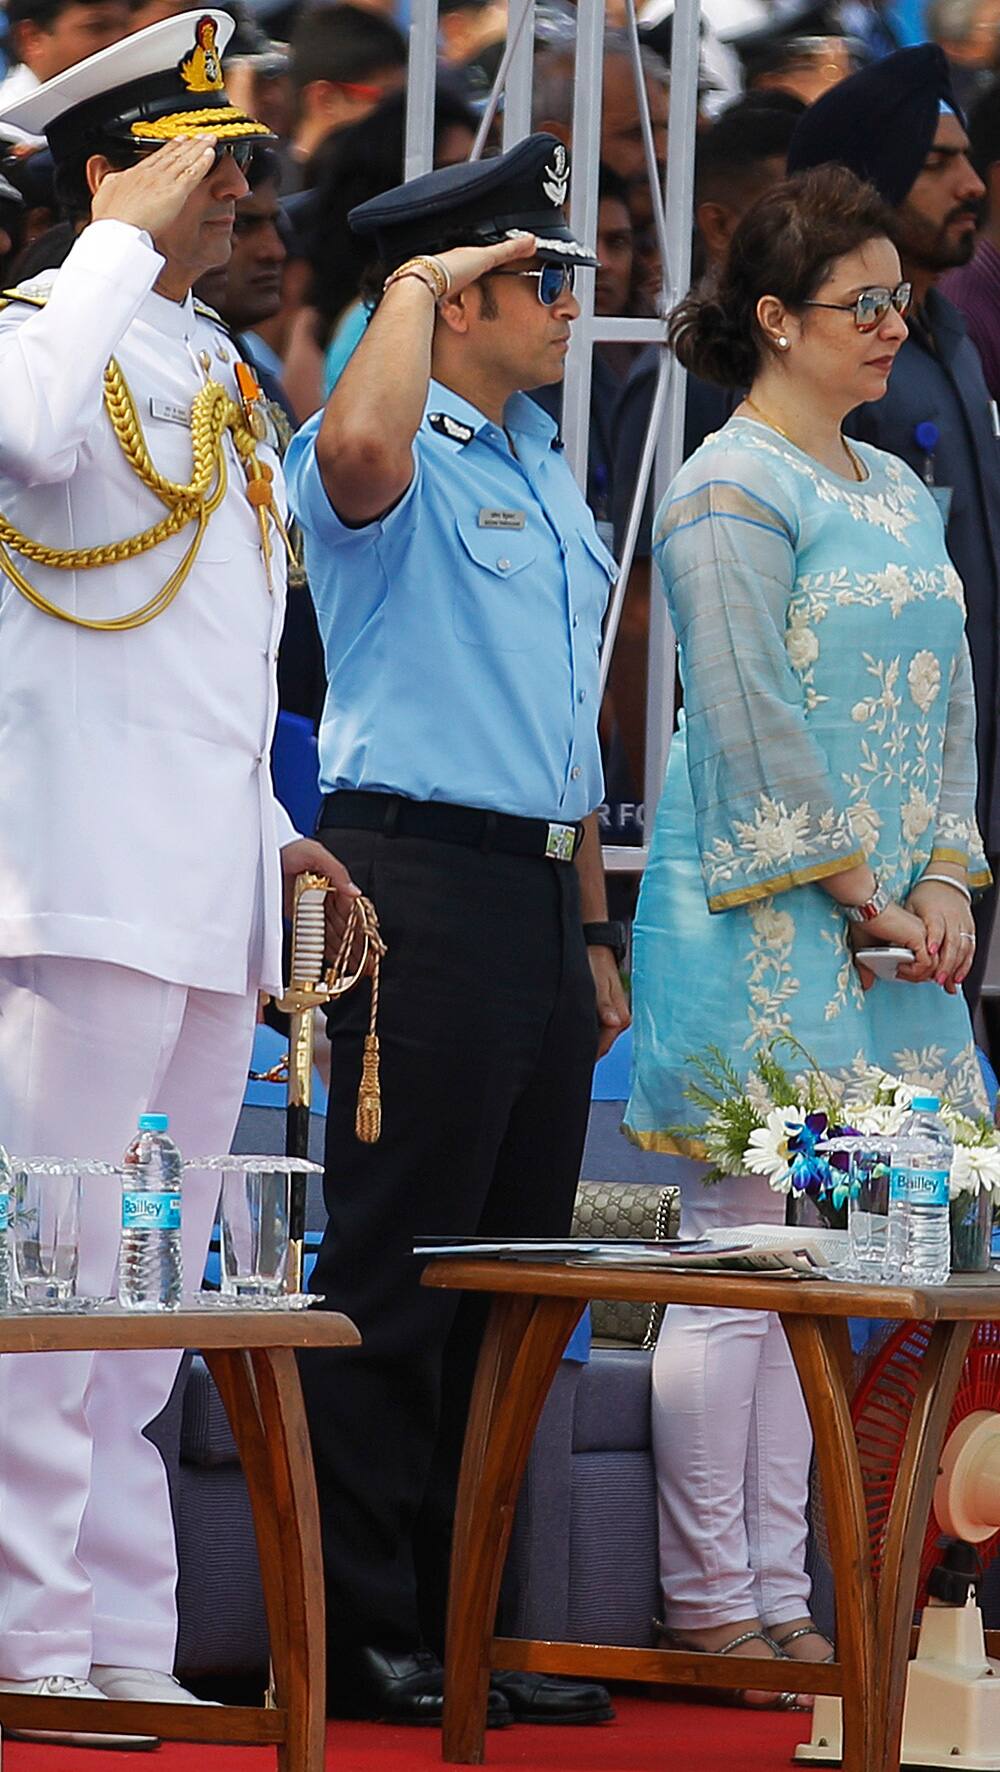 Former Indian cricketer and honorary Indian Air Force Group Captain Sachin Tendulkar, center, salutes along with other officers as Indian Air Force (IAF) personnel march during Air Force Day parade at the air force station in Hindon near New Delhi.